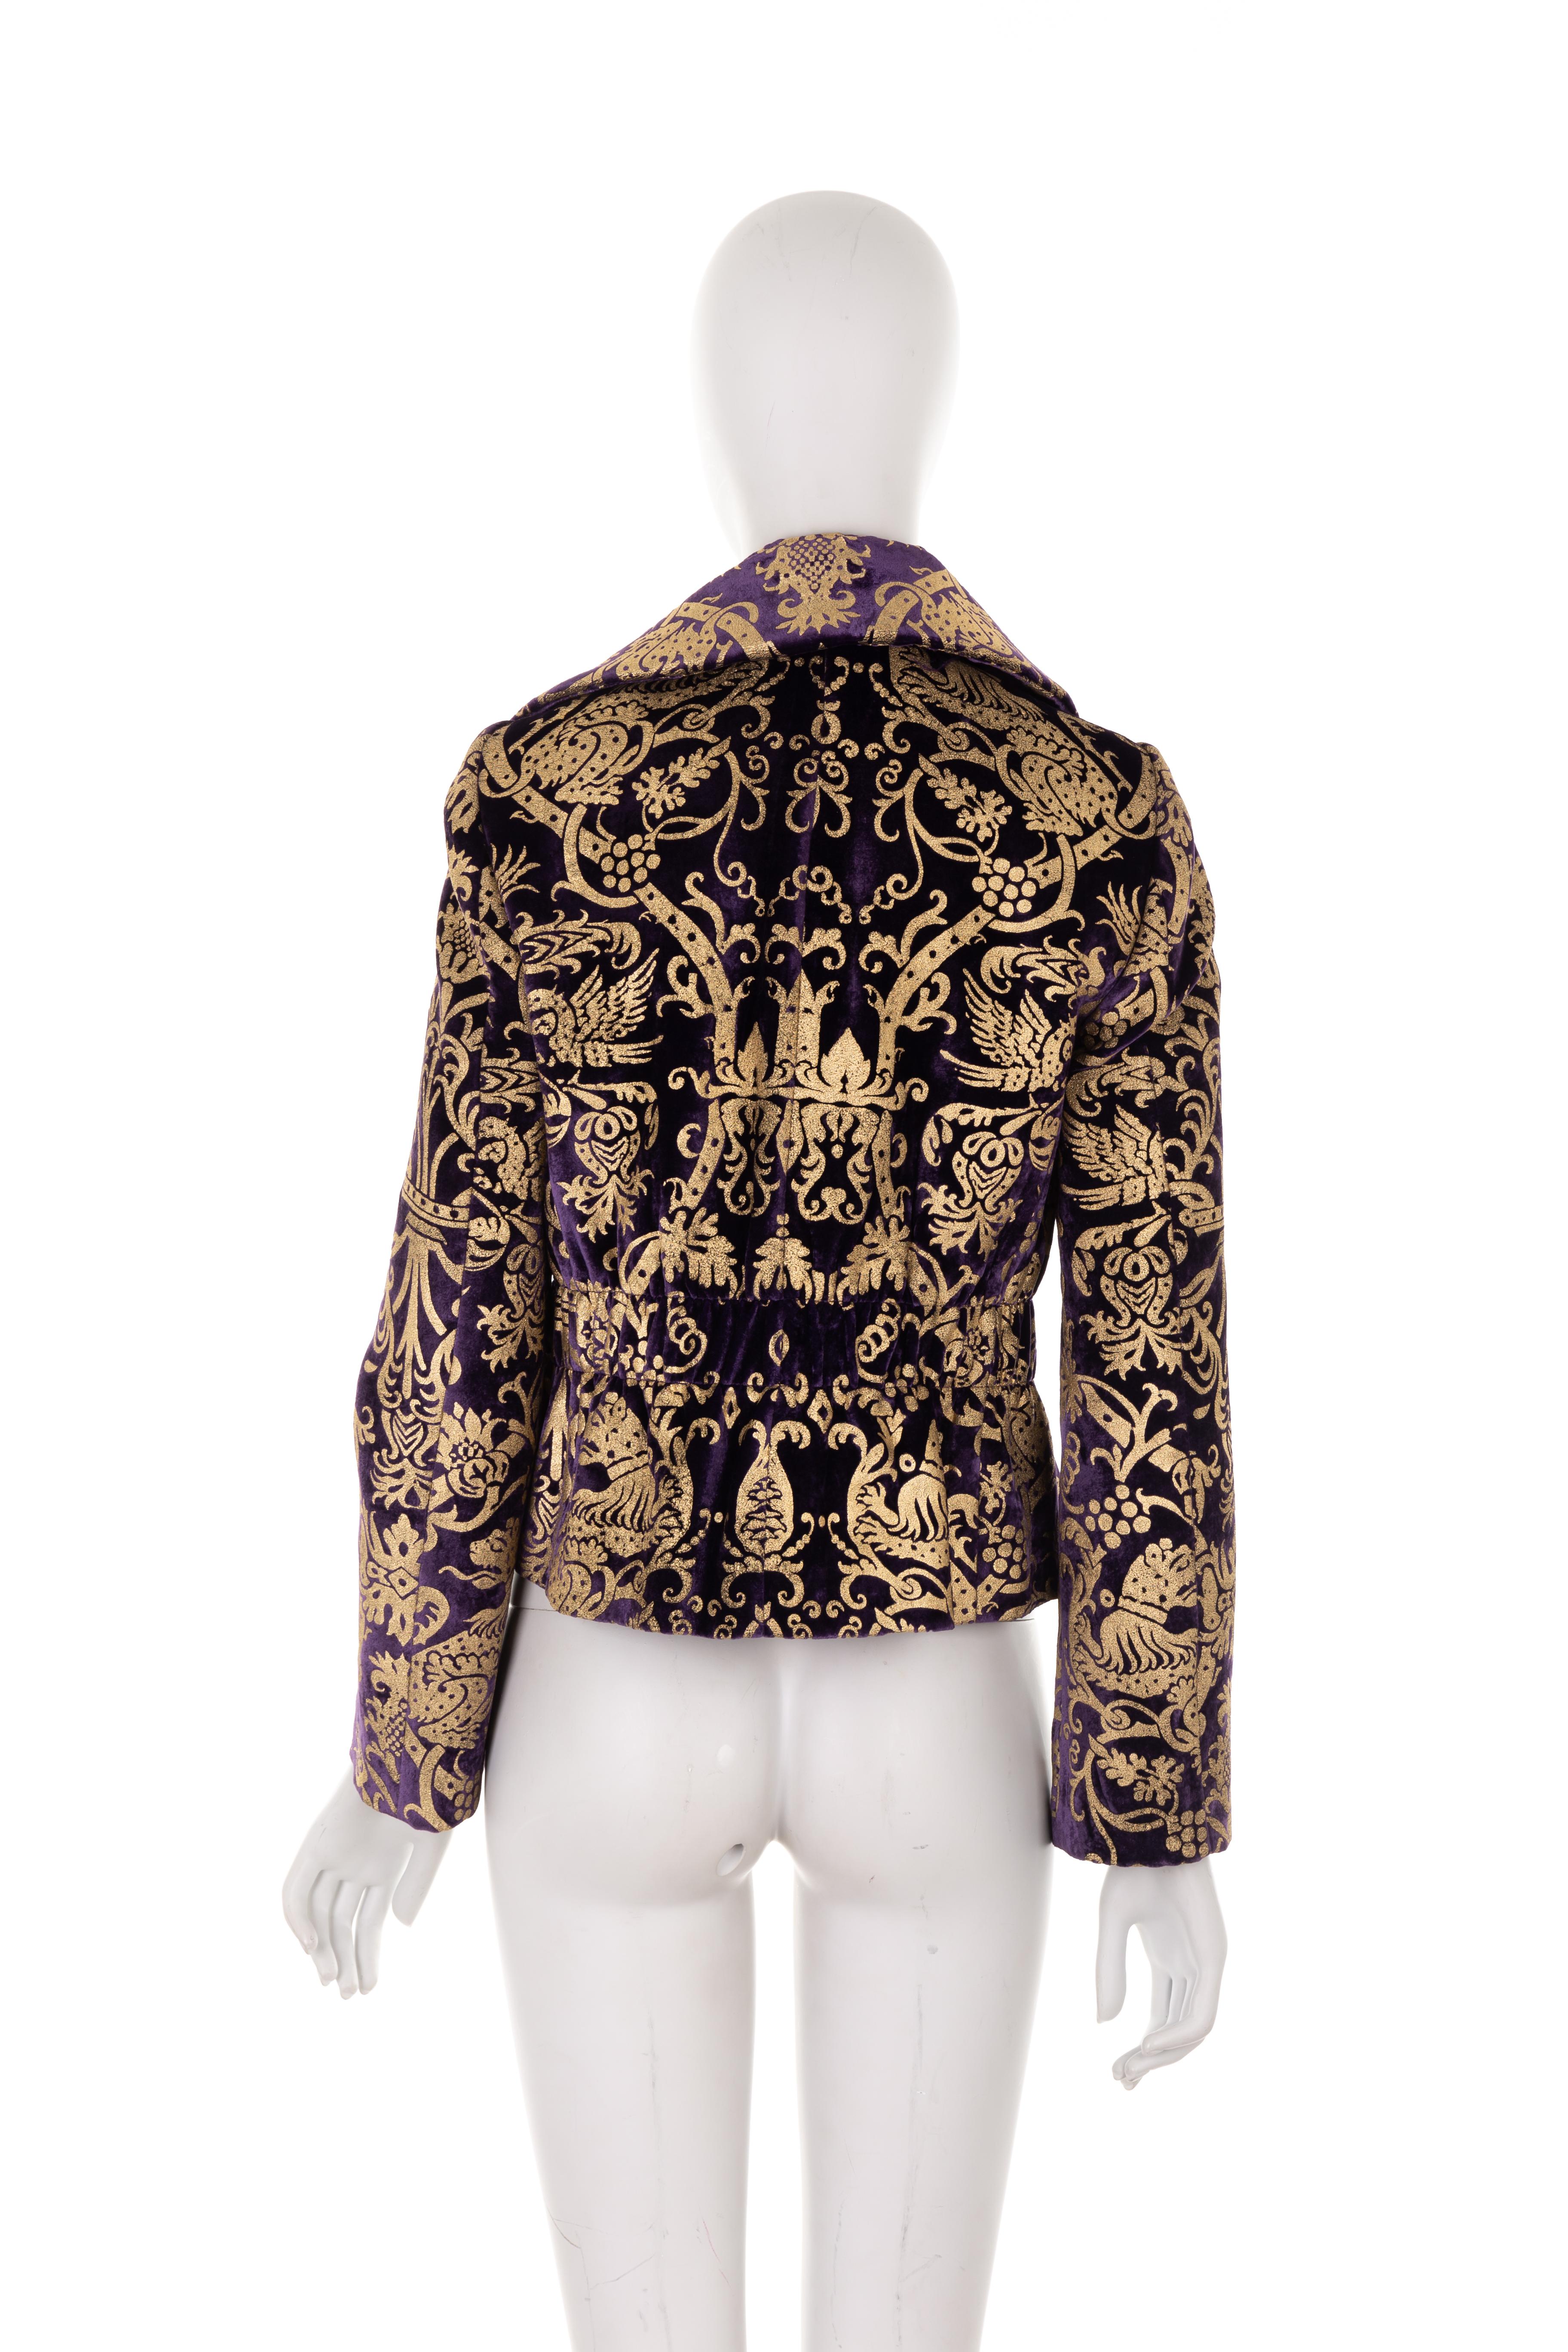 Roberto Cavalli F/W 2006 purple velvet jacket with gold baroque motif In Excellent Condition For Sale In Rome, IT